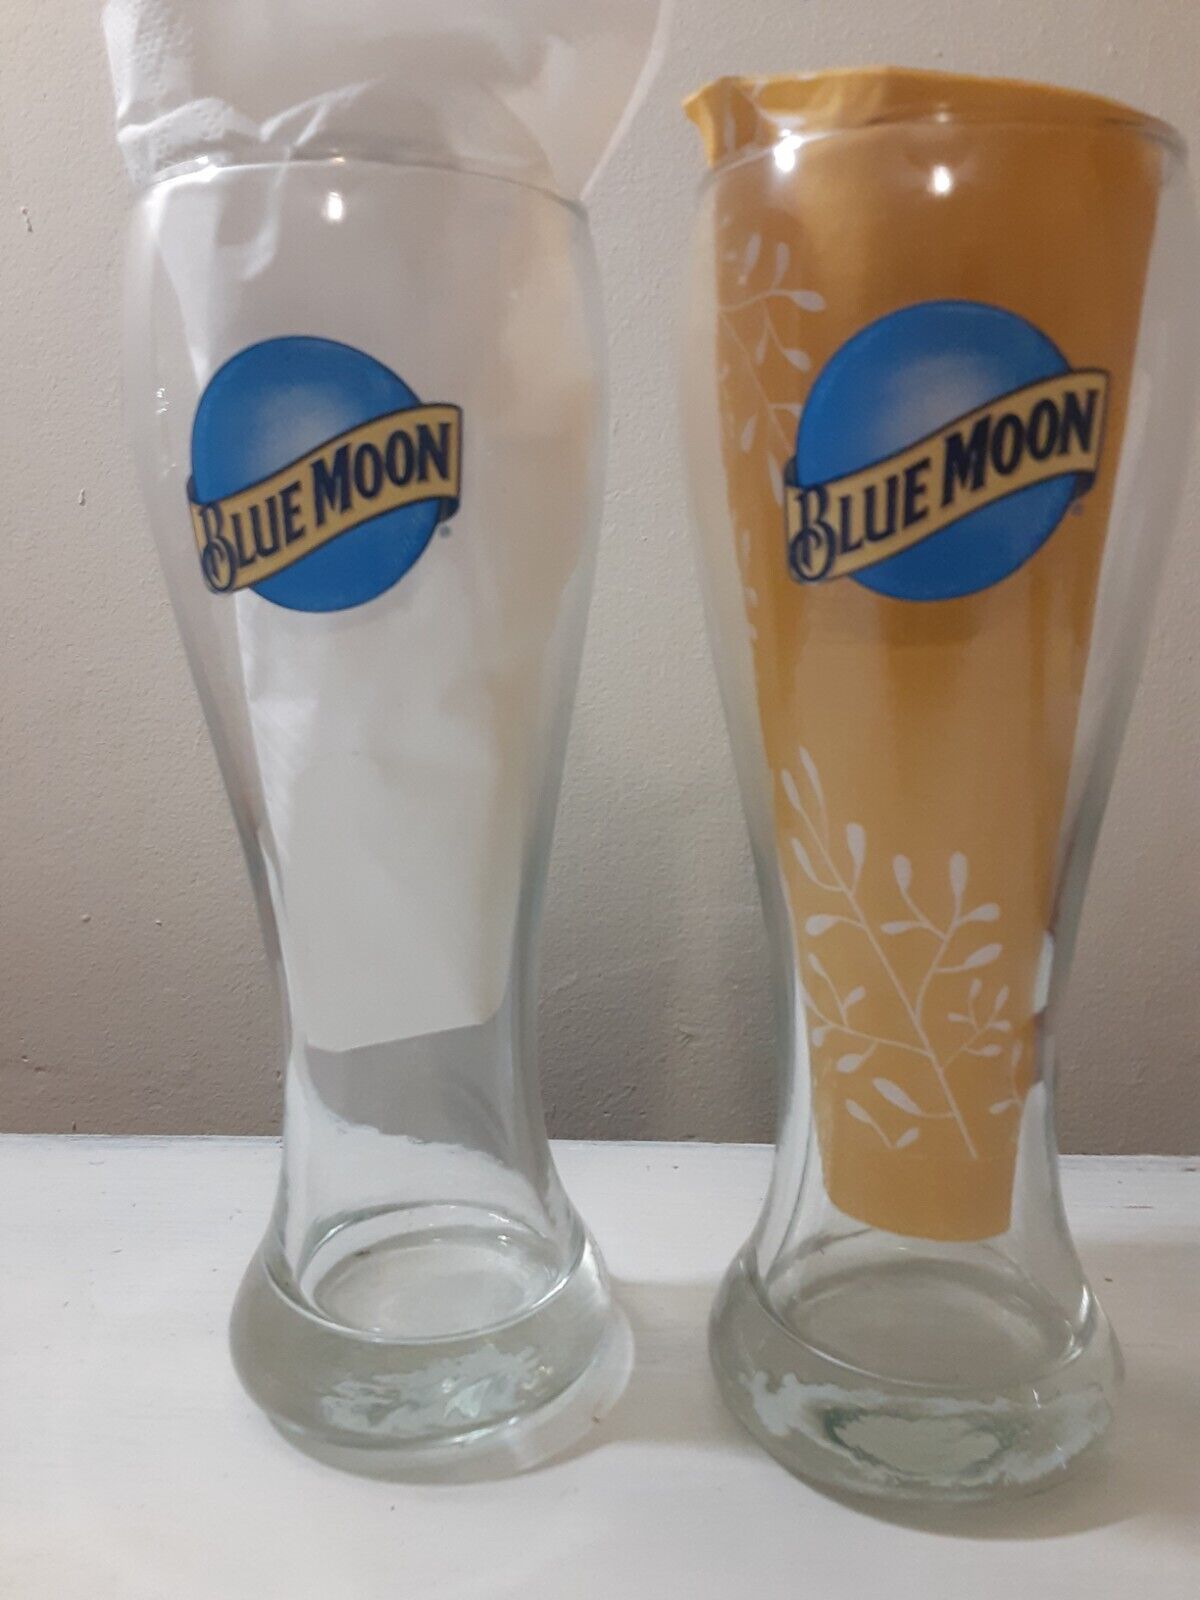 Pair of Brand New Blue Moon 16 Ounce OZ Clear Pilsner Beer, Two Glasses